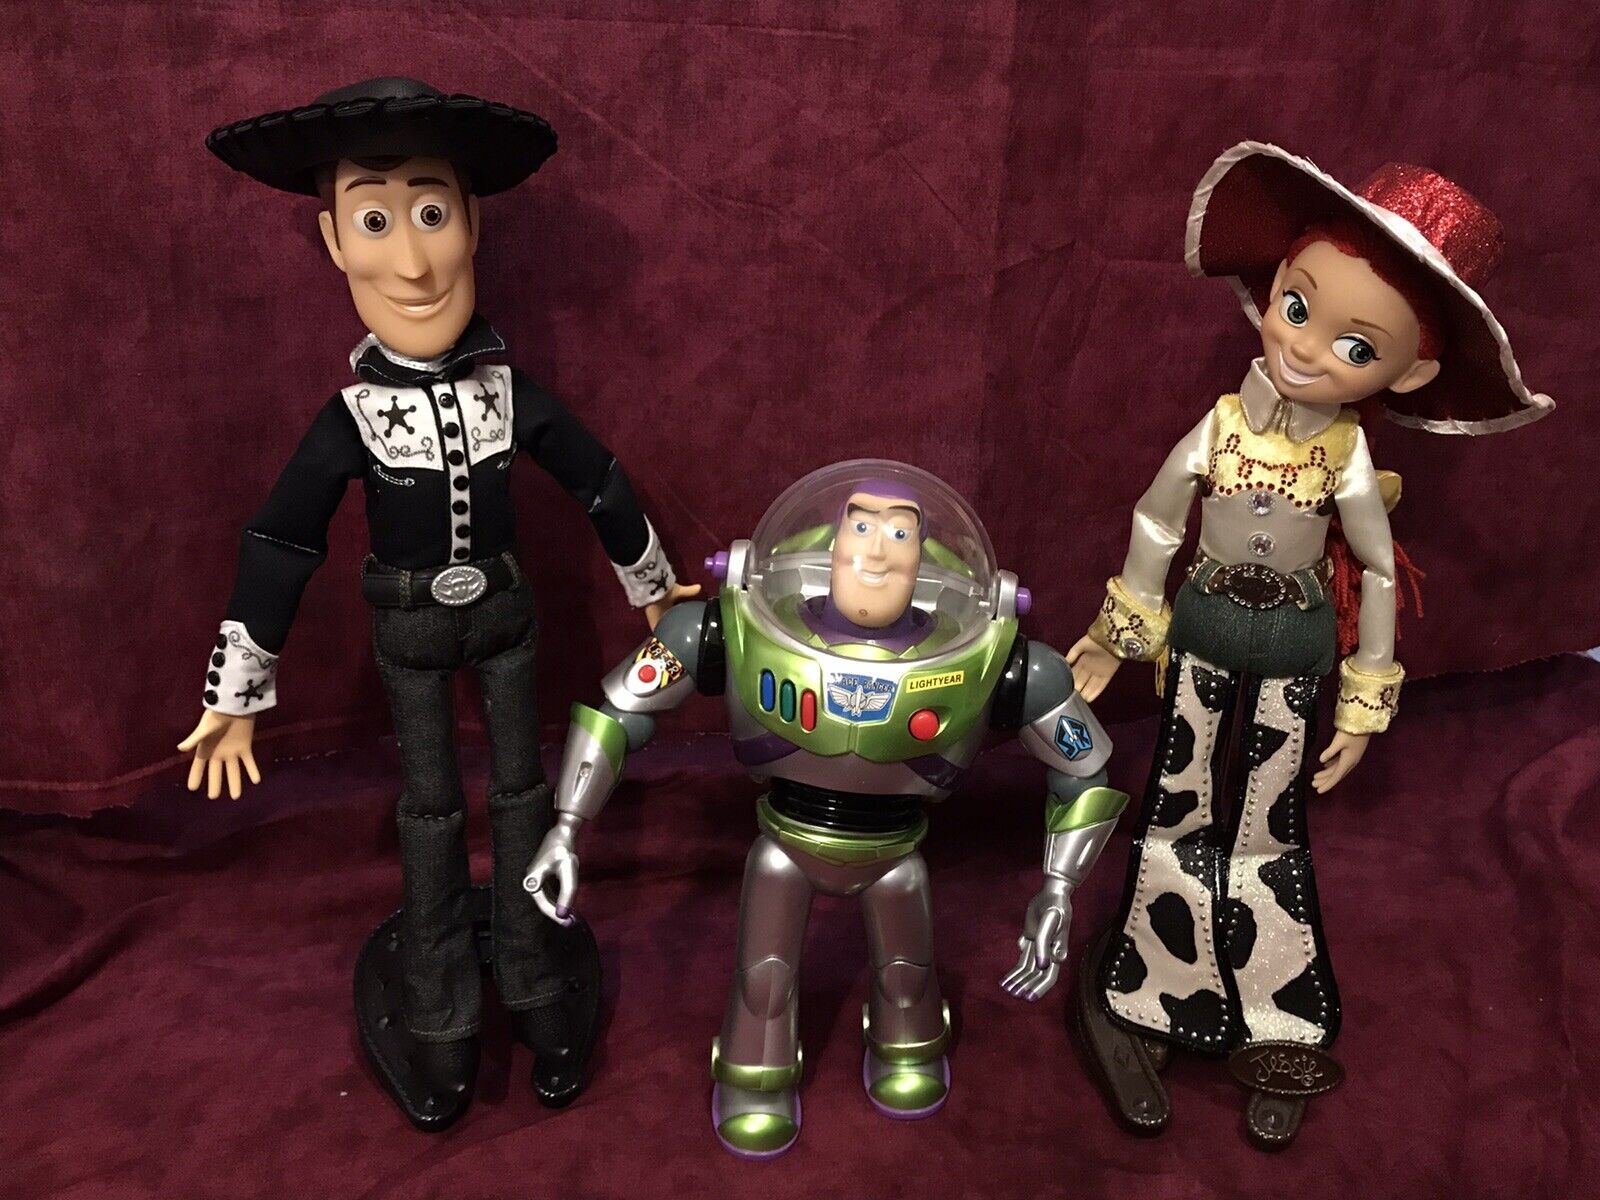 Disney Store Limited Edition Toy Story 3 Talking Jessie Collector Doll 149/2010